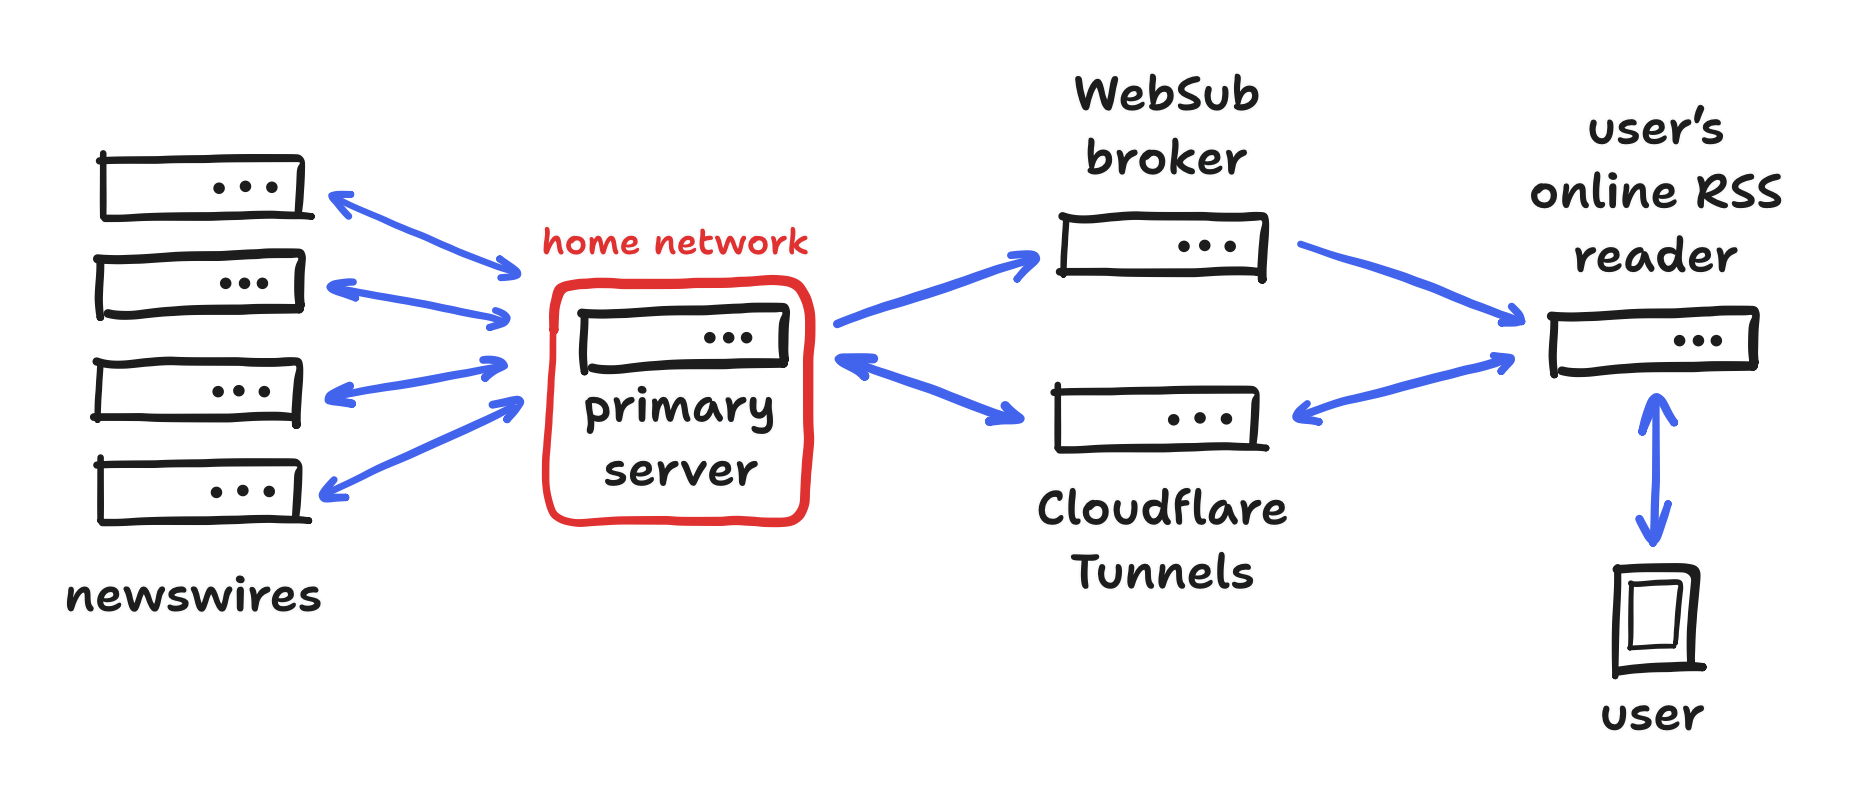 diagram showing infrastructure of revRSS project as of Nov 4th, 2023, consisting of a primary server interacting with newswires and using Cloudflares Tunnels as its public face, while at the same time a user can be notified by their online RSS reader via a WebSub broker. primary server circled in red to show that it is within my home network